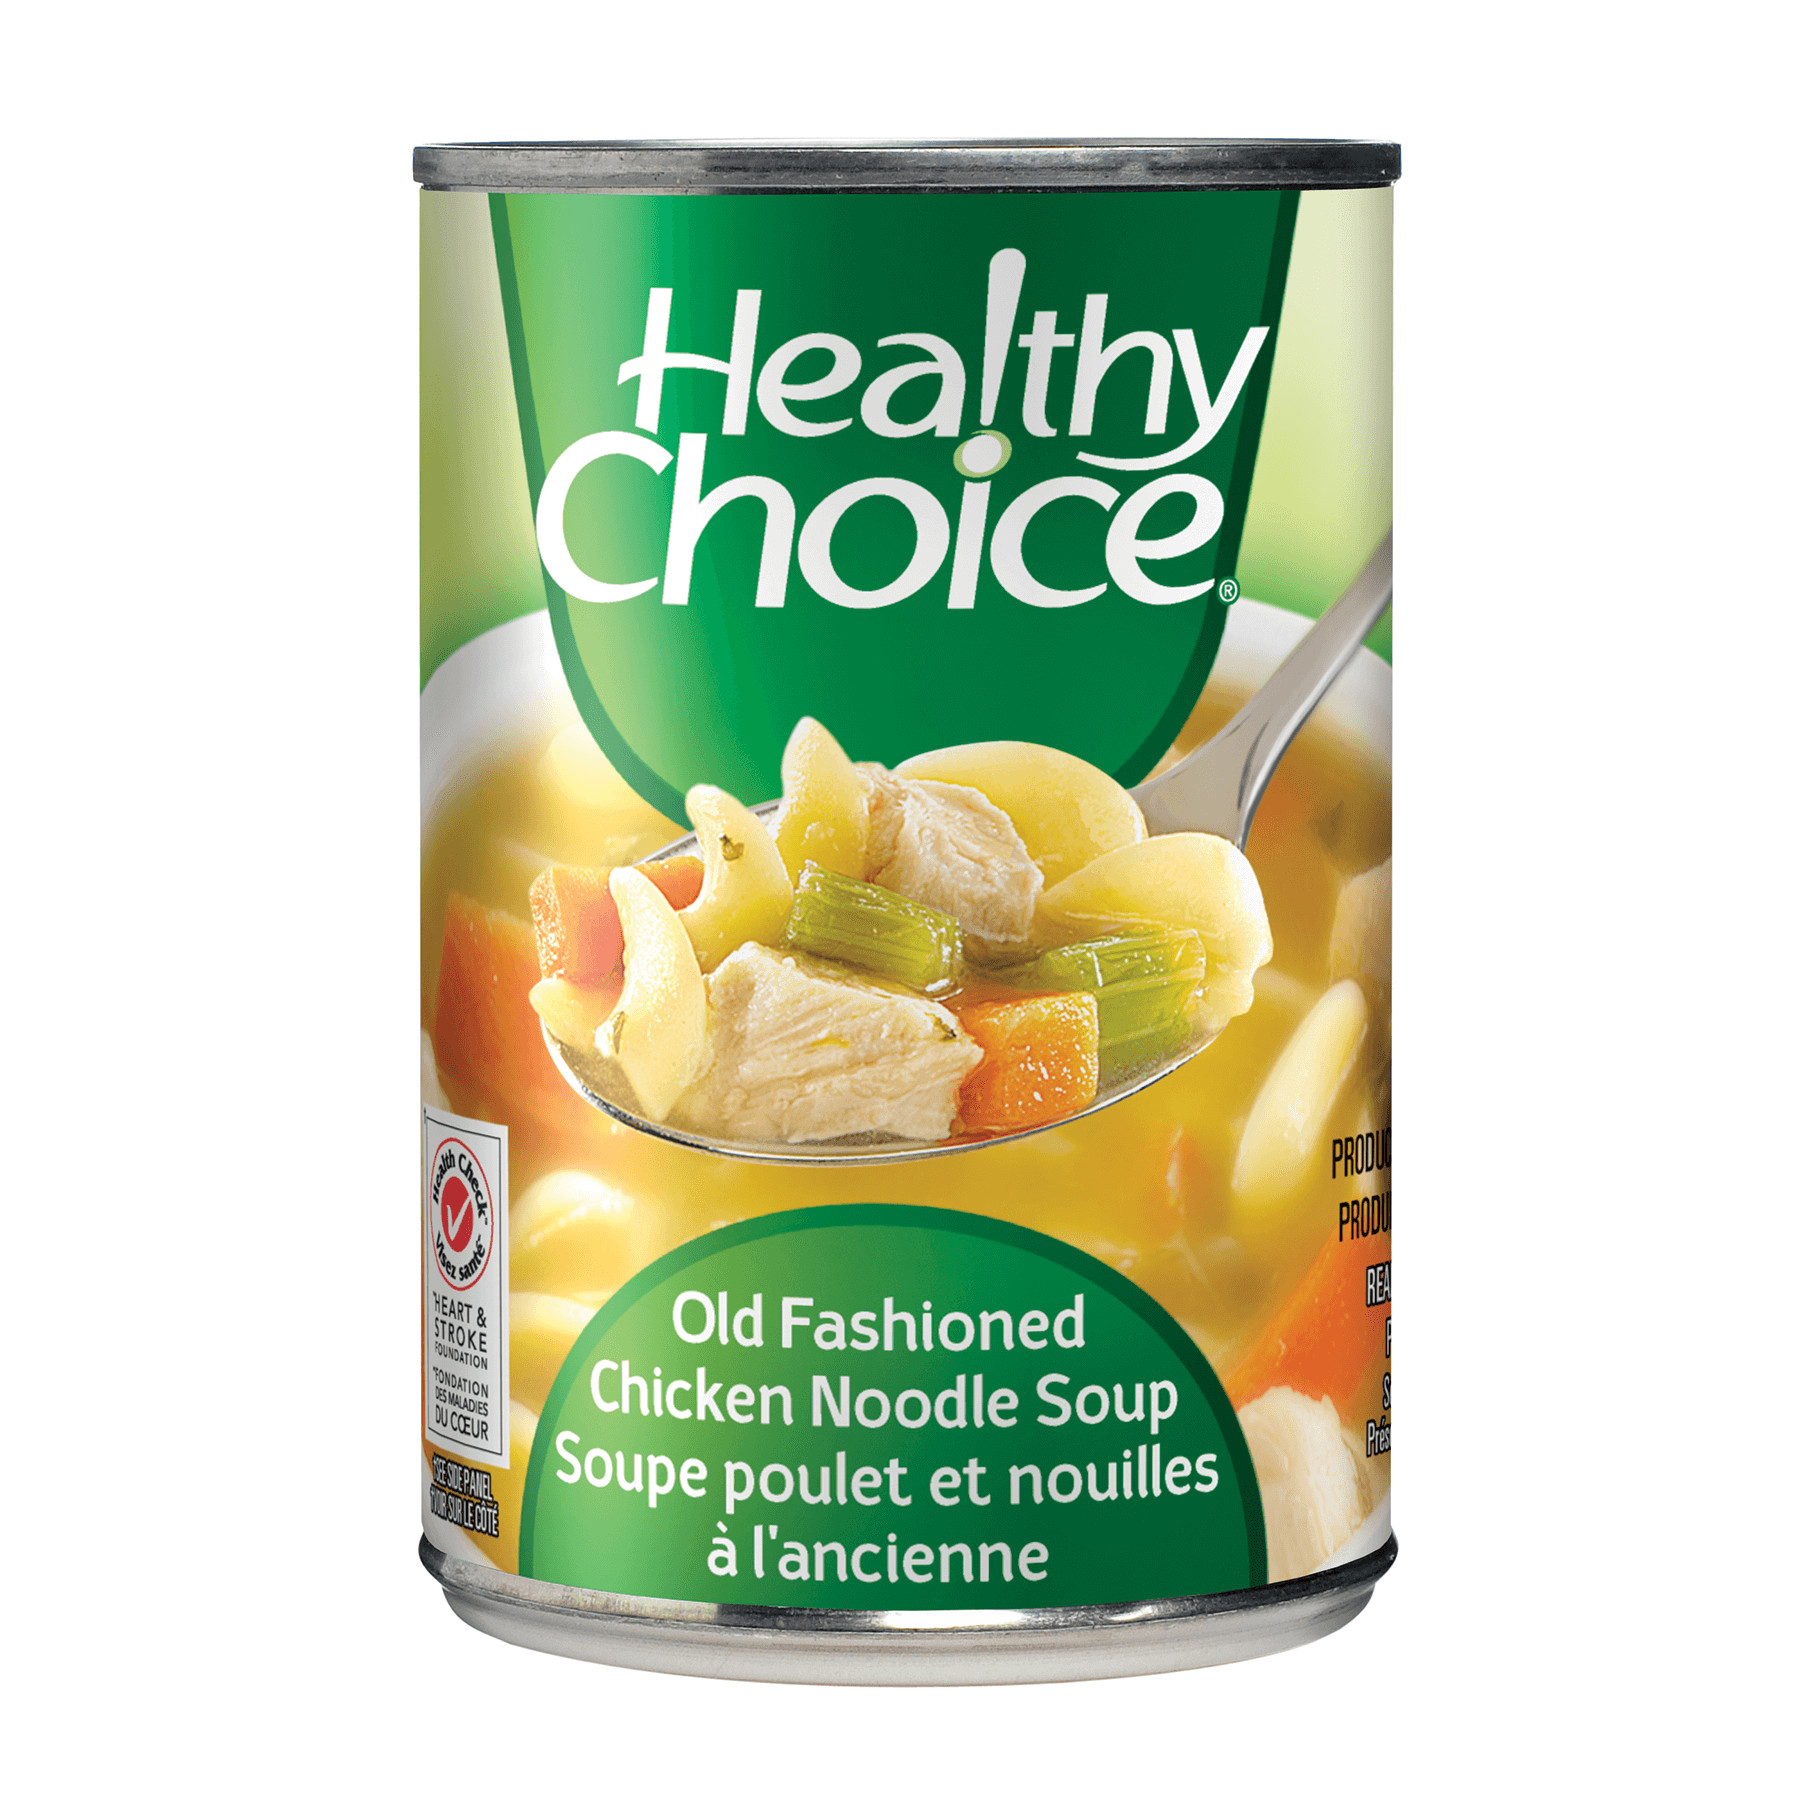 Healthy Choice Soups
 is healthy choice soup good for you